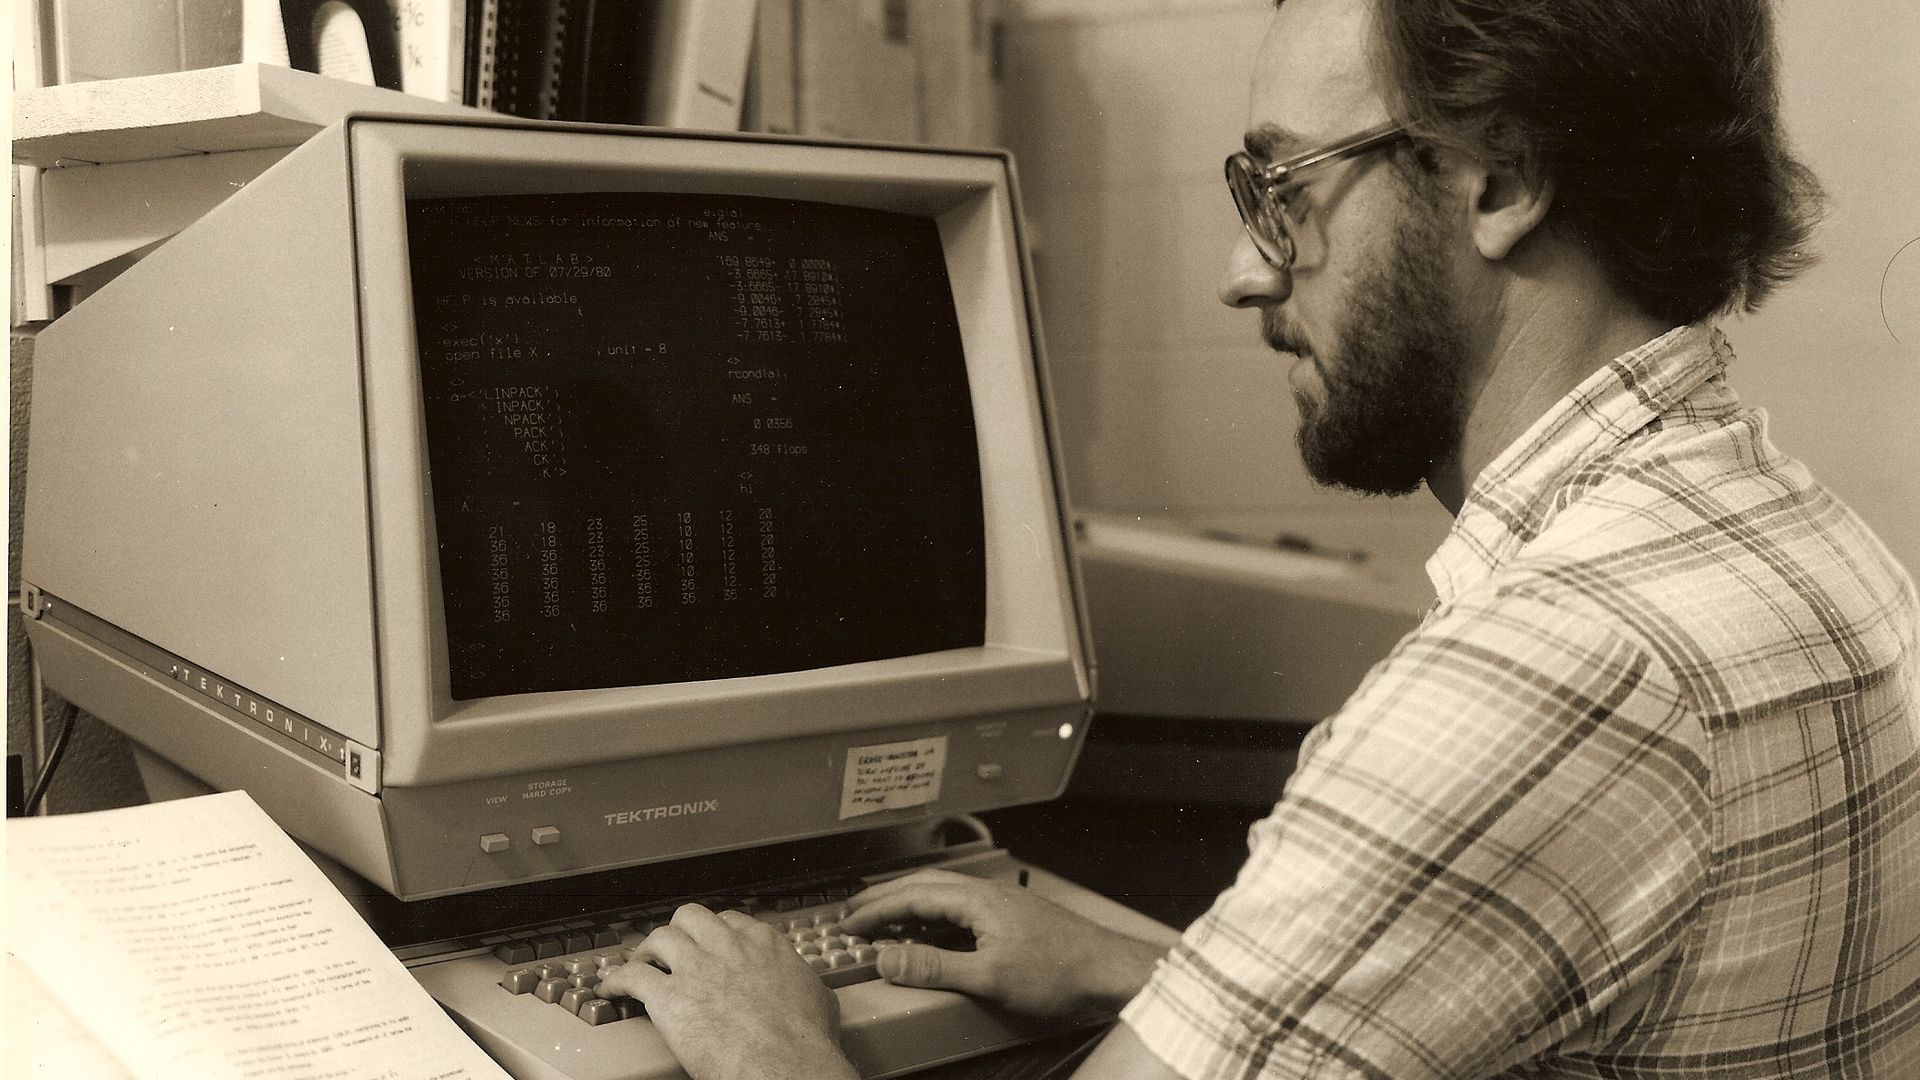 Jack Dongarra, in 1980 at Argonne National Lab, with a Tektronix 4081 Workstation. 